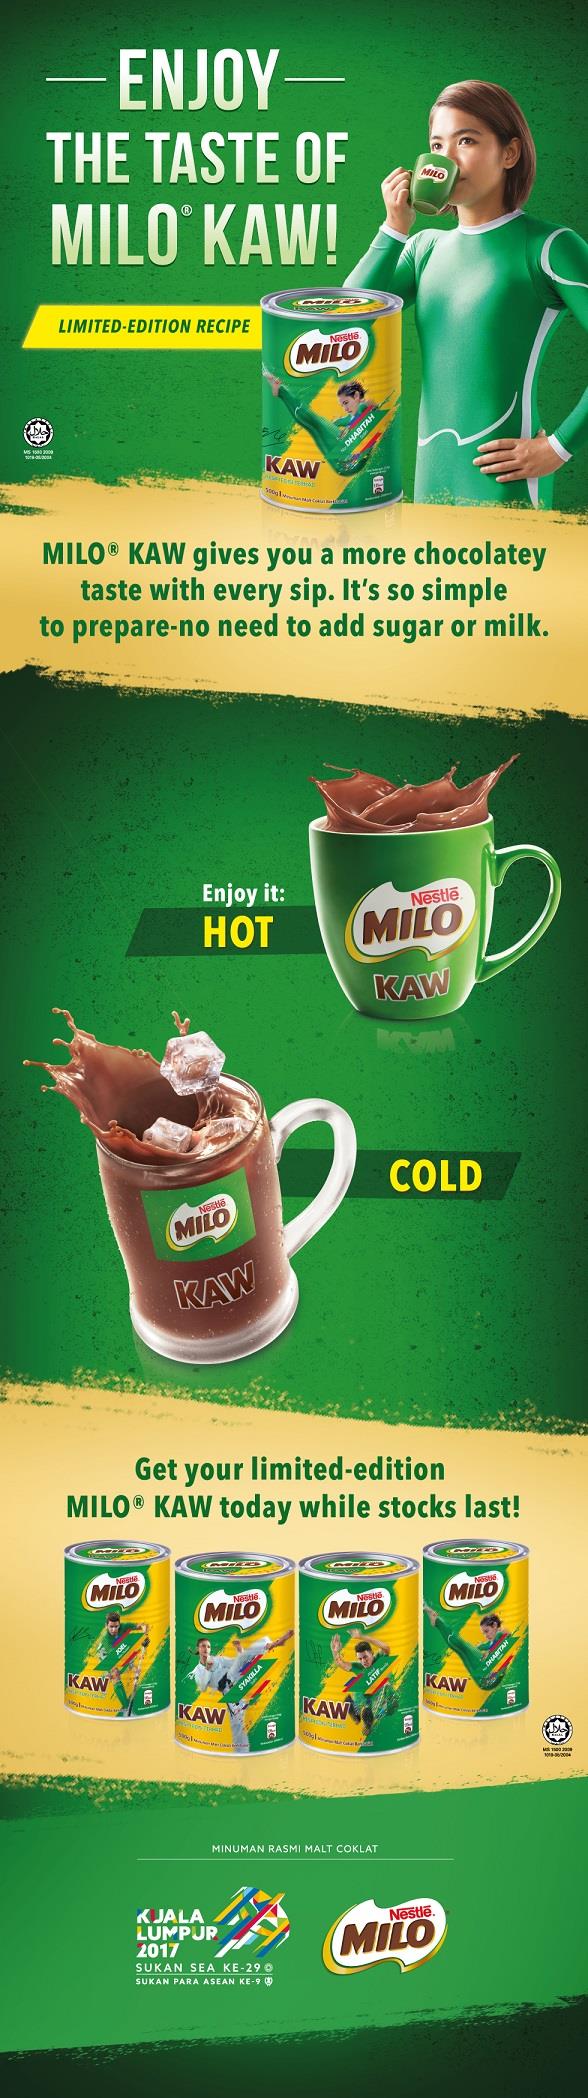 Limited Edition Milo Kaw 500g 11street Malaysia Malt And Cereal 8606